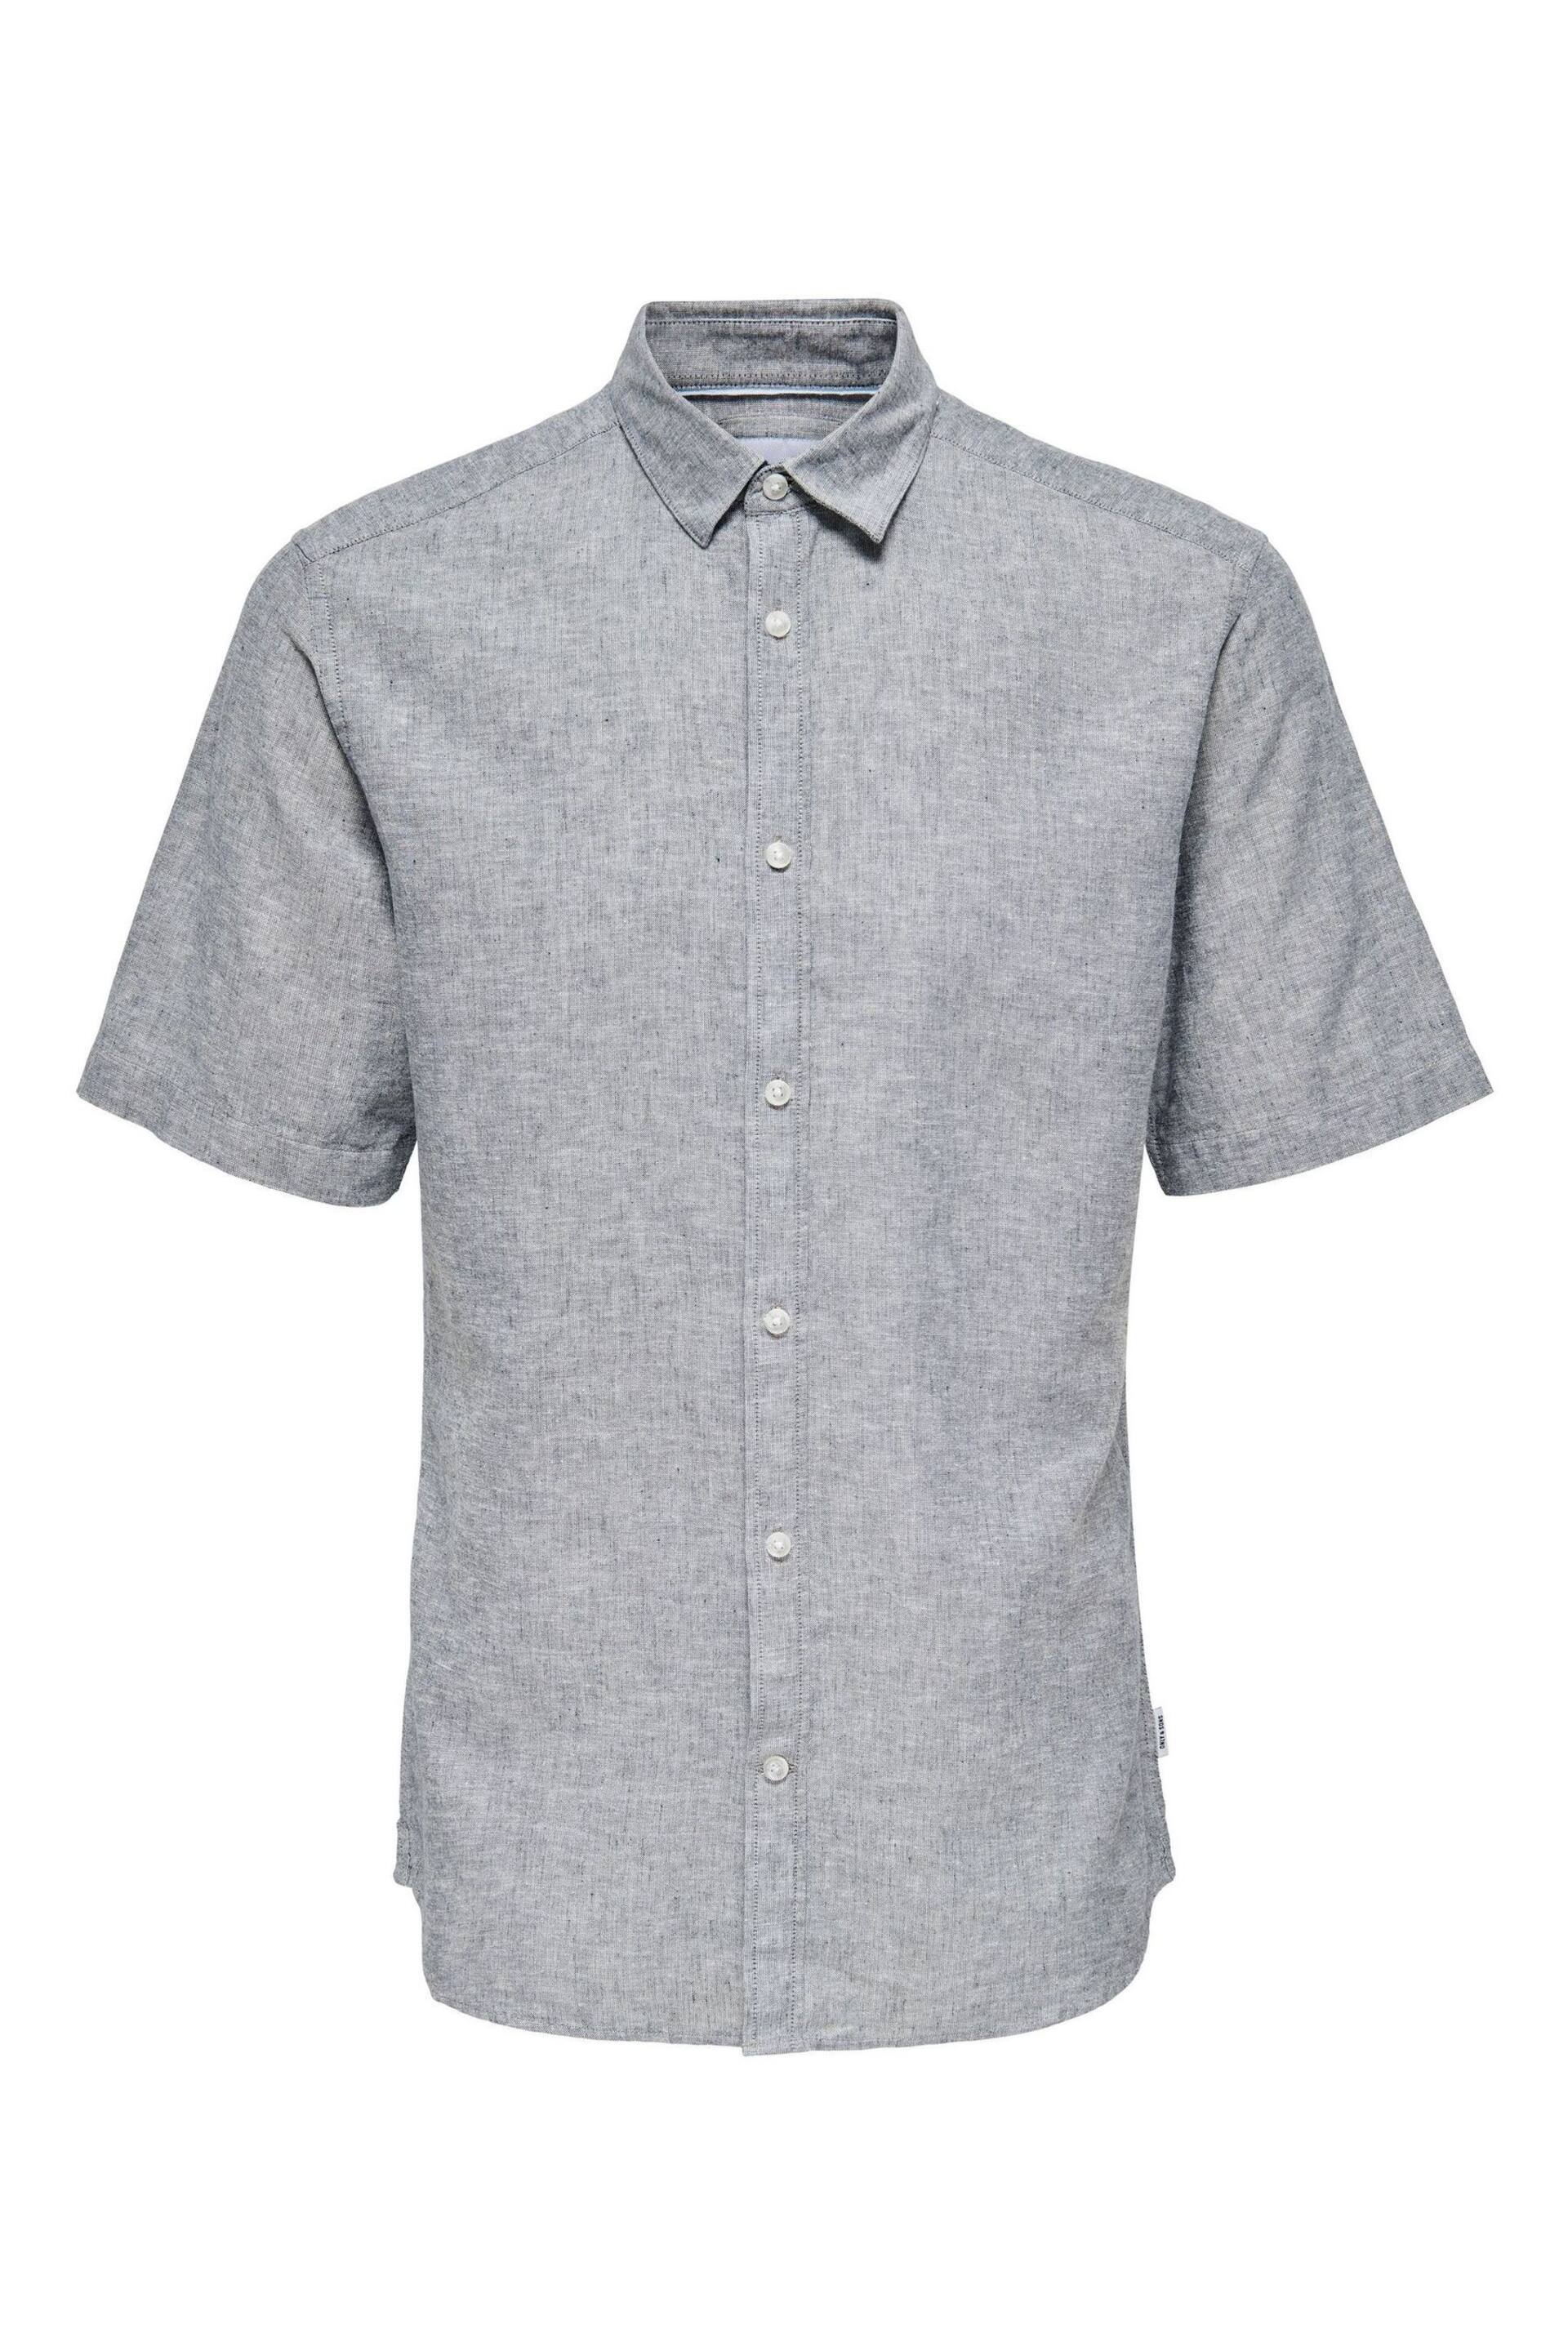 Only & Sons grey Short Sleeve Button Up Shirt Contains Linen - Image 5 of 5